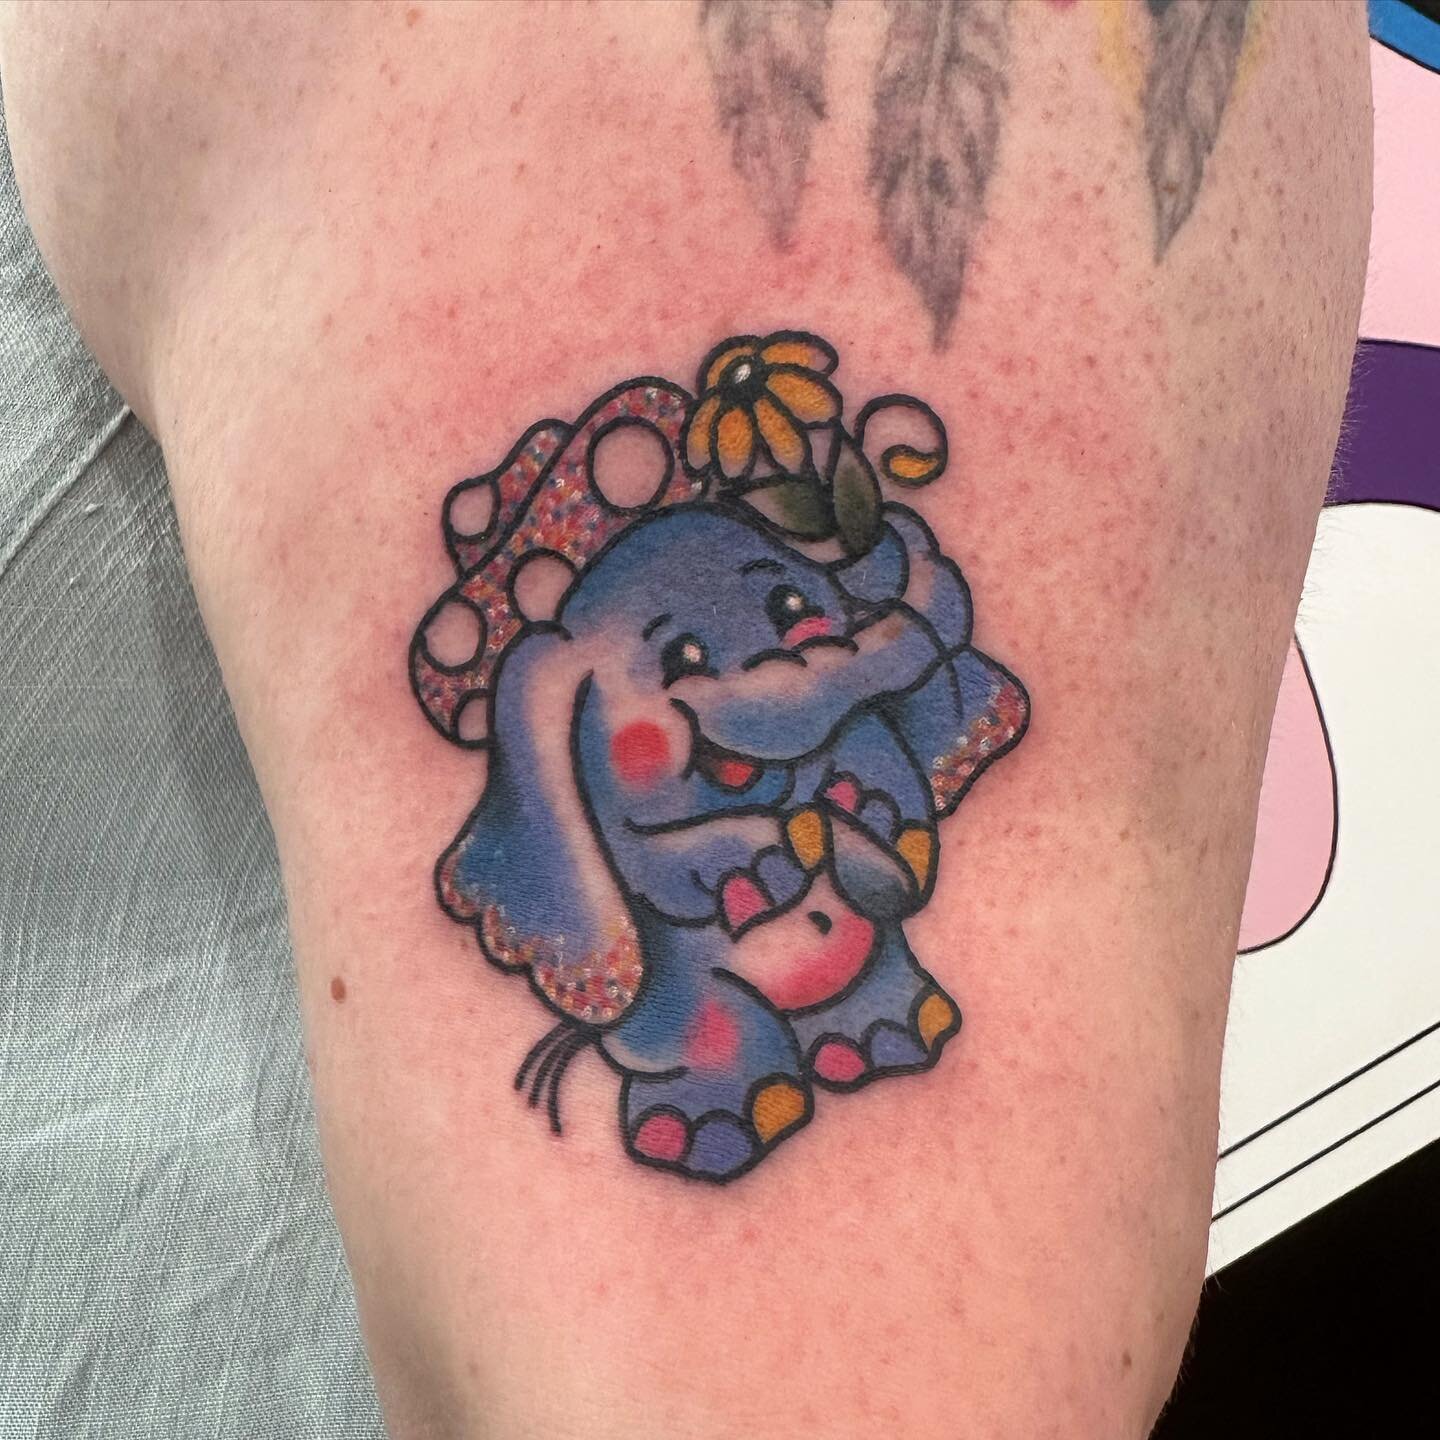 🌼Elephant🌼 off my flash for my pal @tracing.reality! Thank you for the trust and continued support, always love seeing you. #elephant #elephanttattoo #tattoo #tattoos #cutetattoo #kankakeecounty #kankakeetattoo #bradleyillinois #chicagotattoo #illi